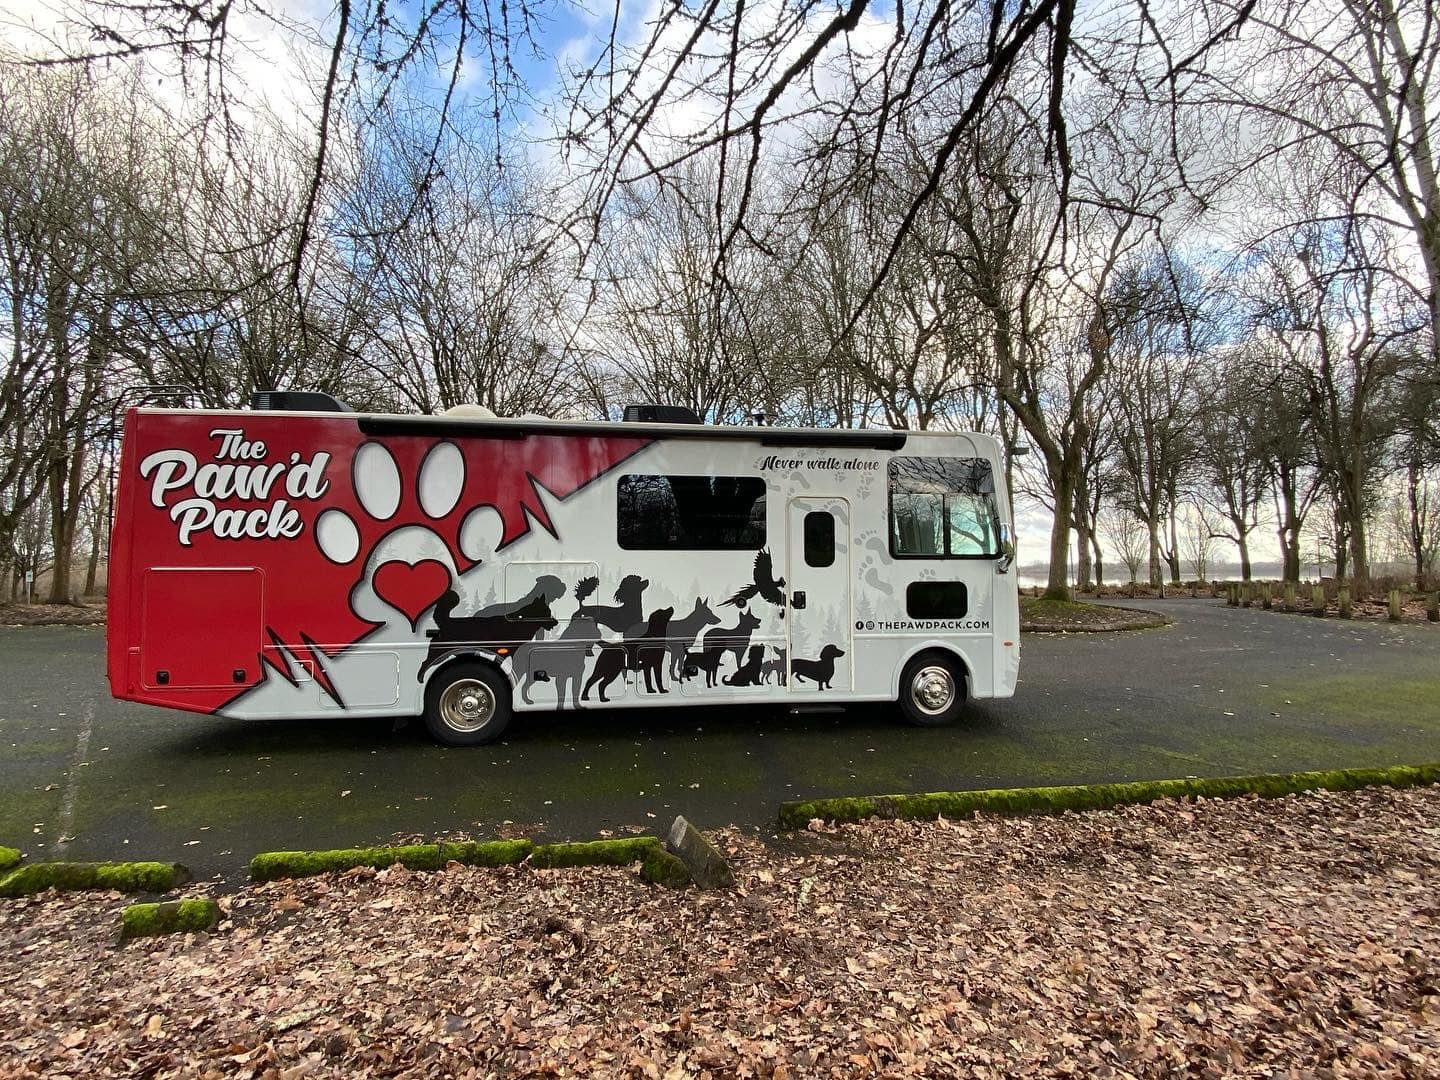 The Paw’d Pack Bus, which takes members of “The Pack” on their last “Bucket List” adventures is pictured. Members of “The Pack” are animals with illnesses on the verge of dying.